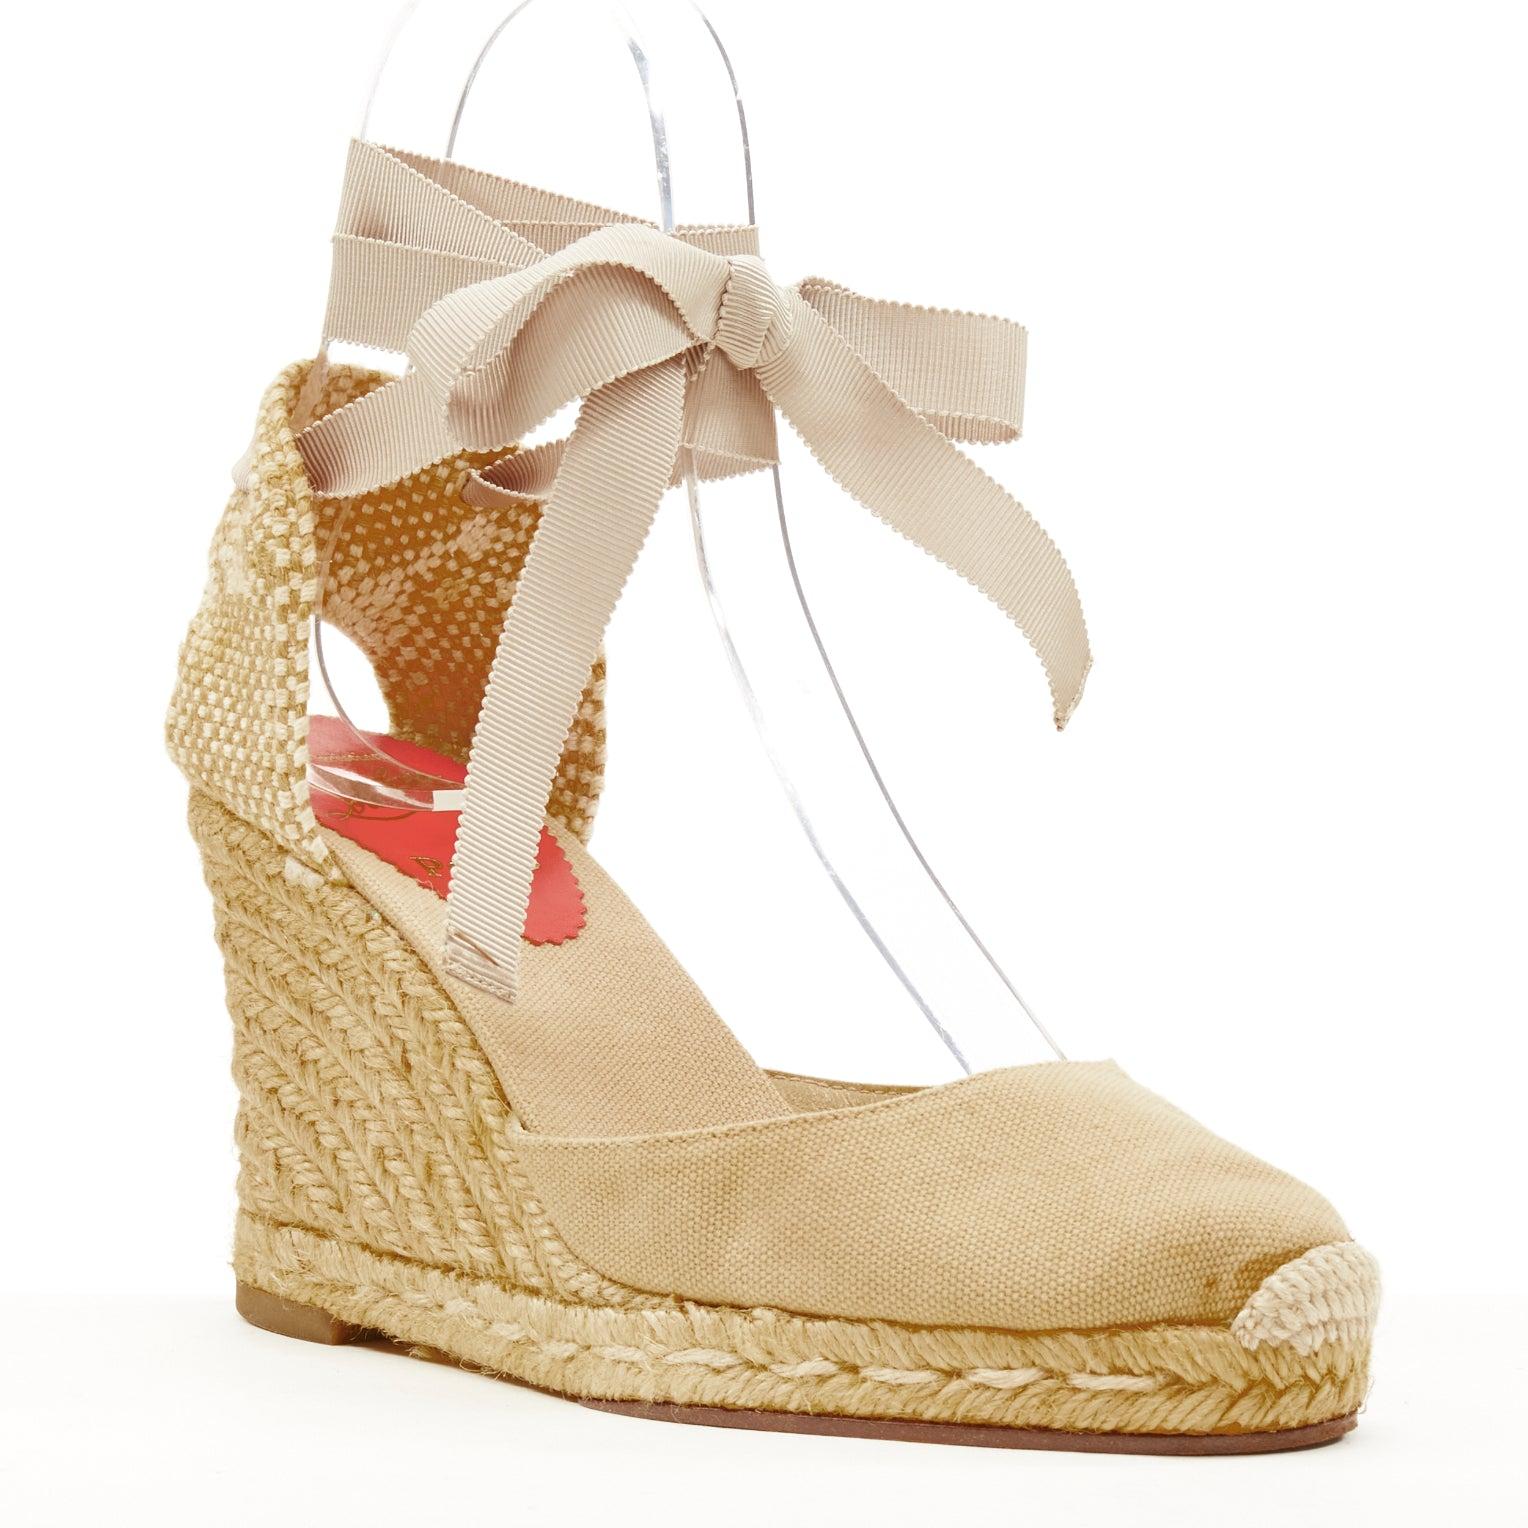 CHRISTIAN LOUBOUTIN beige canvas espadrille wedge ribbon tie heel EU37
Reference: SNKO/A00189
Brand: Christian Louboutin
Material: Canvas, Straw
Pattern: Solid
Closure: Self Tie
Lining: Canvas
Extra Details: Brown canvas upper. Woven heel.